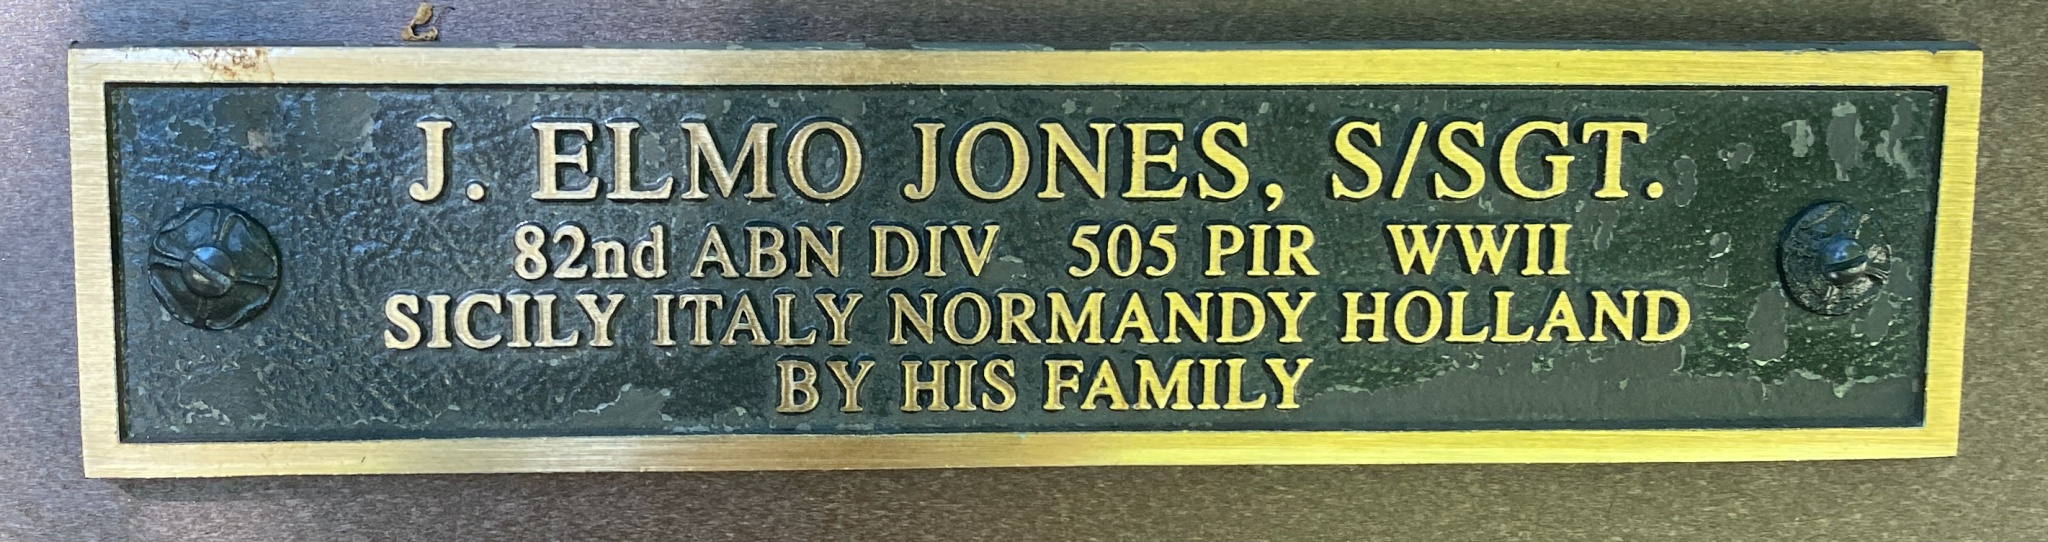 J. ELMO JONES, S/SGT. 82nd ABN DIV 505 PIR WWII SICILY ITALY NORMANDY HOLLAND BY HIS FAMILY